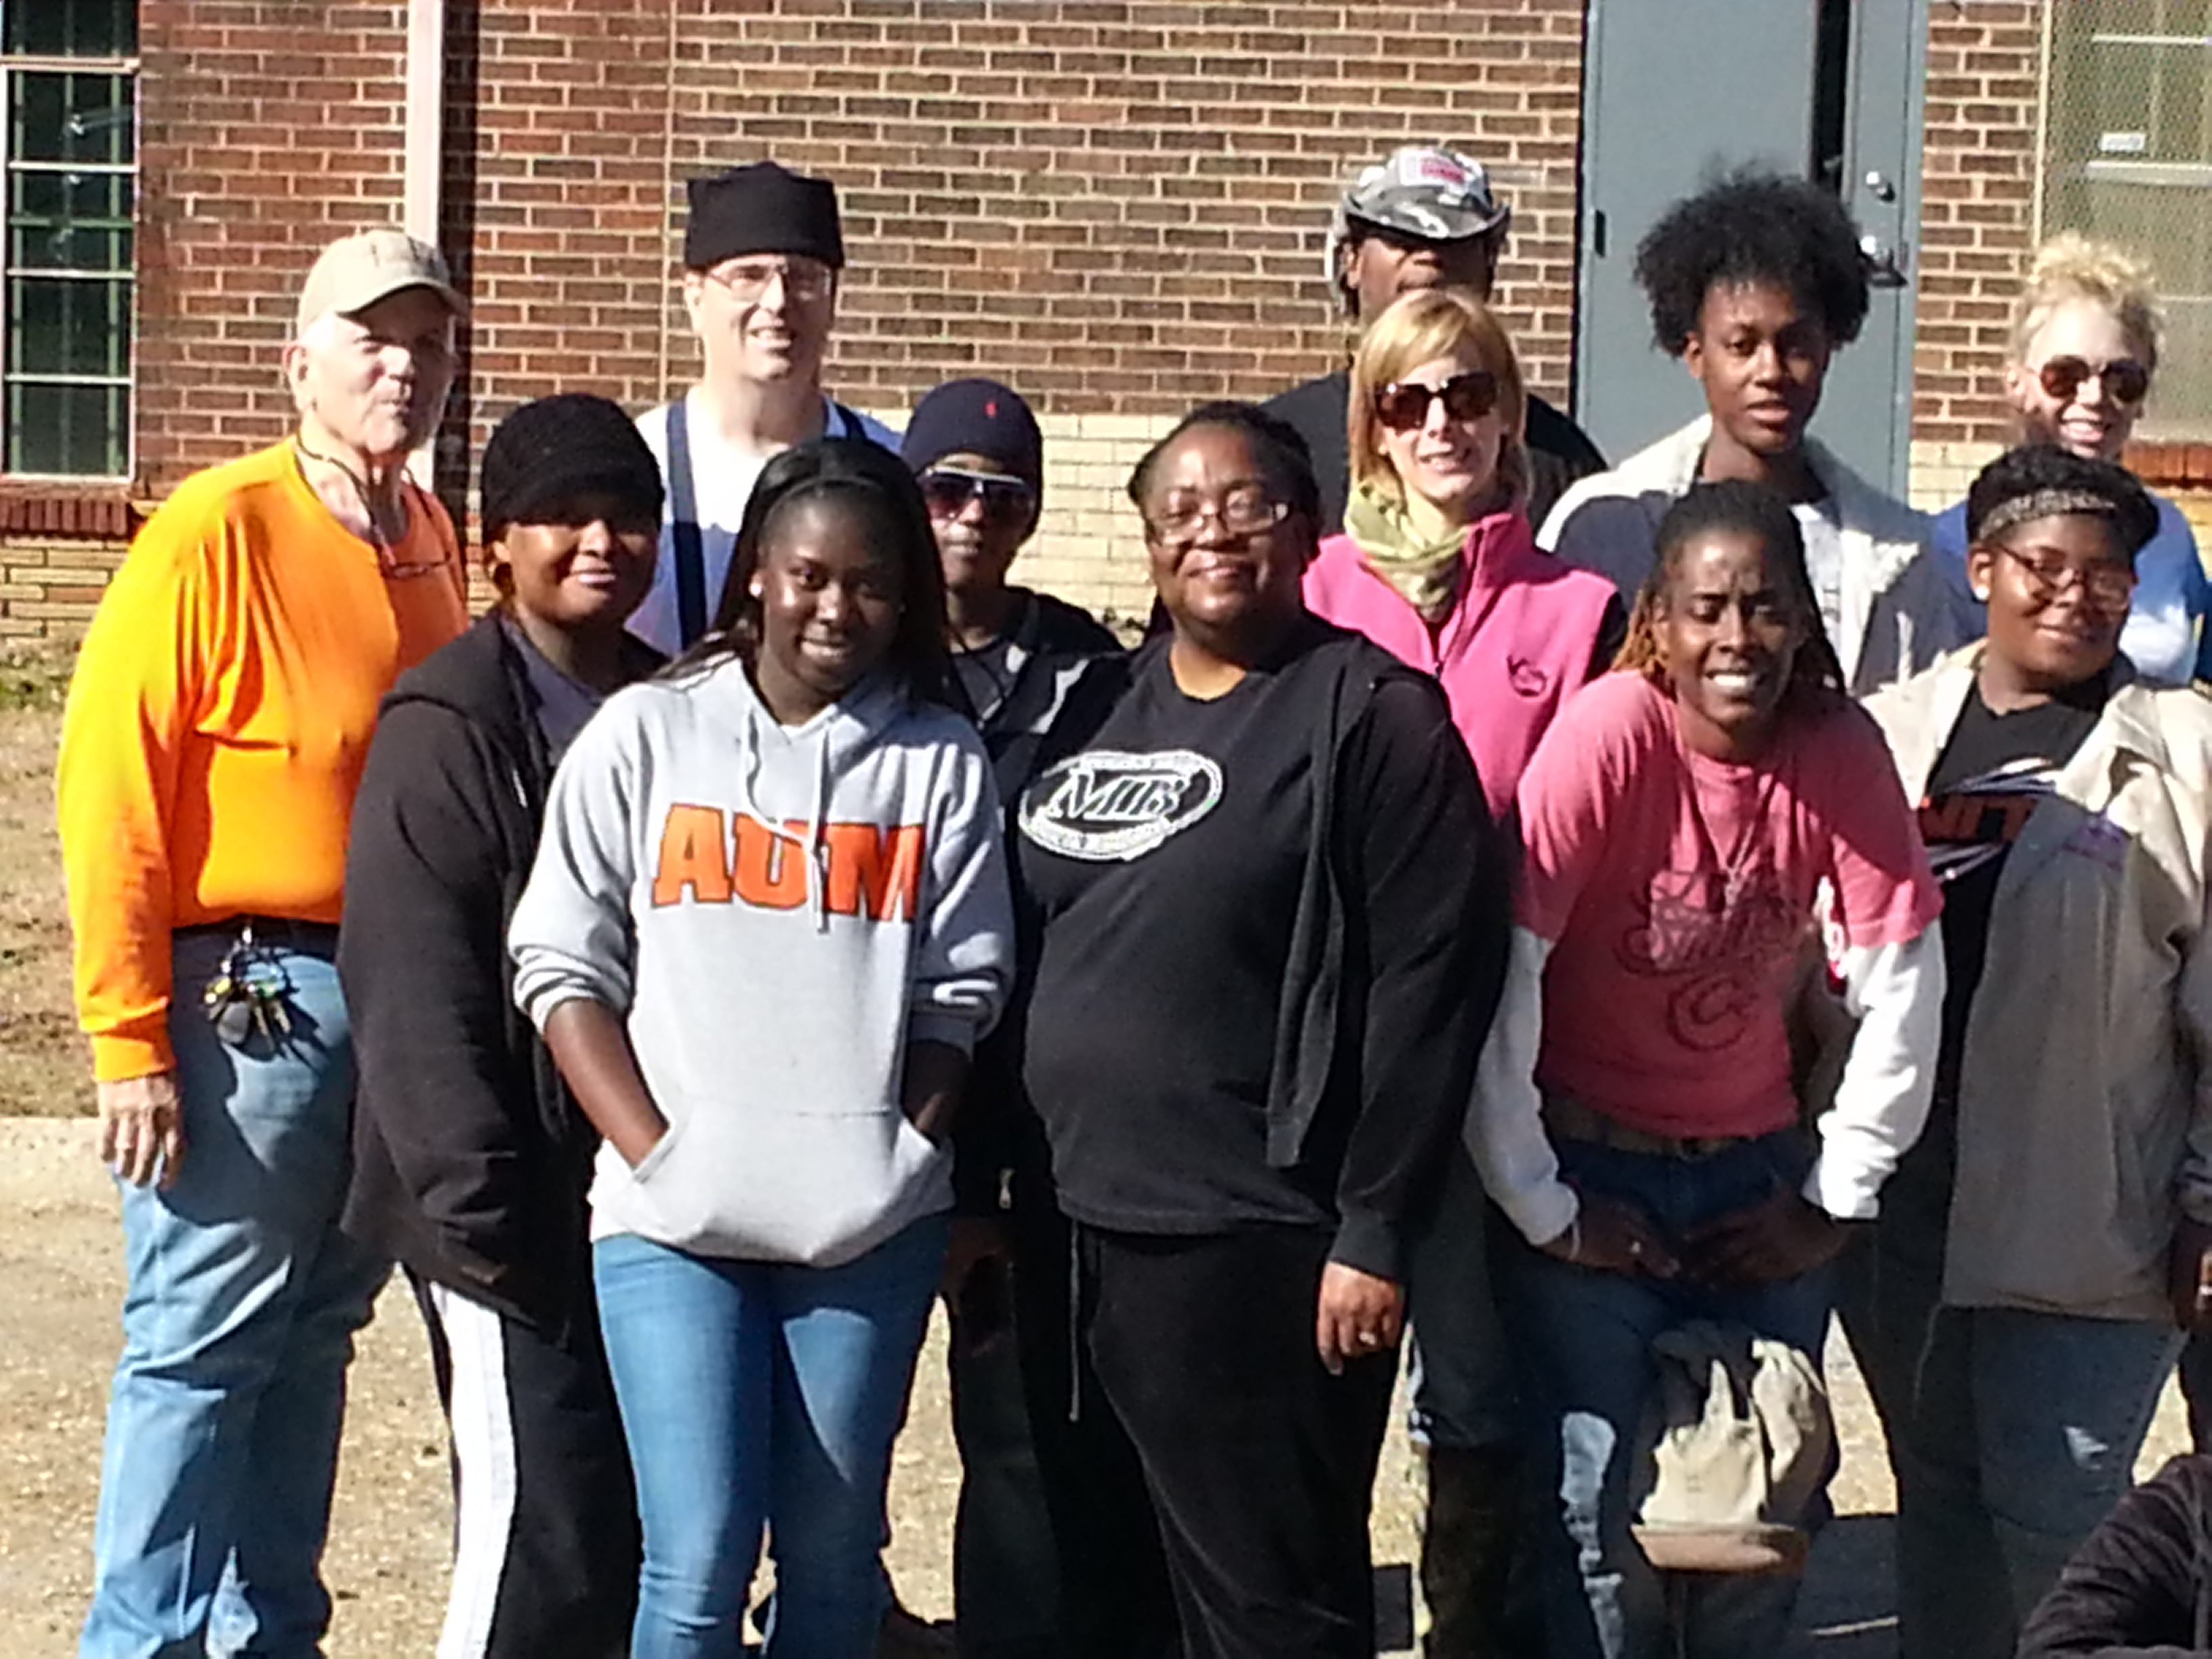 MLK GREAT DAY OF SERVICE – Transformation Montgomery3264 x 2448